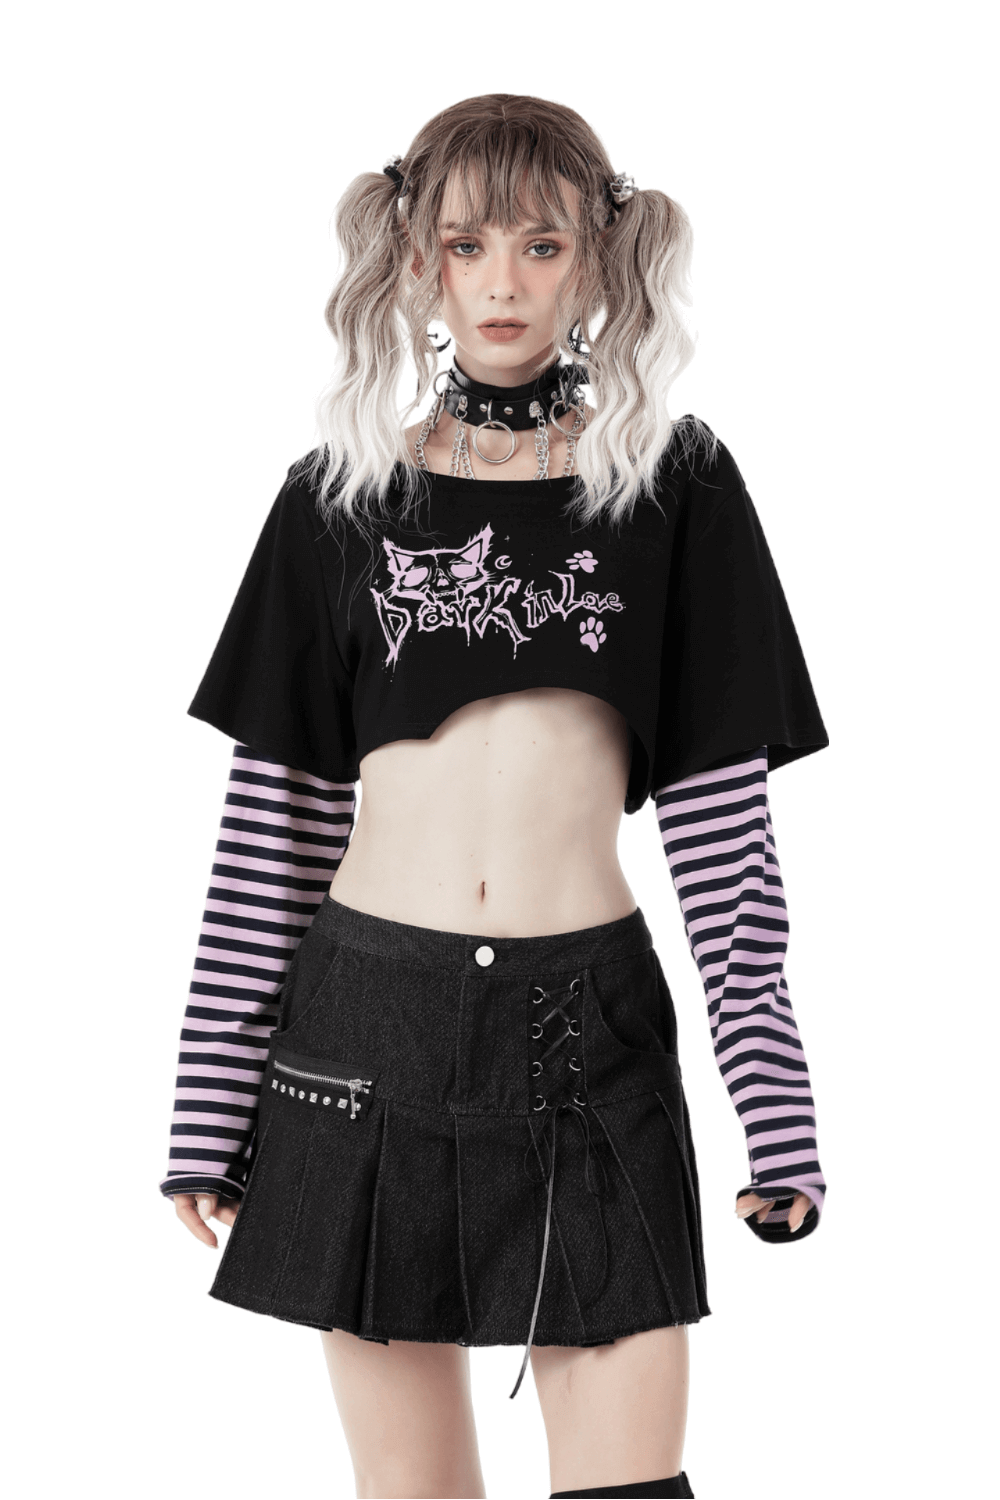 Goth Punk Crop Top with Cheshire Cat Graphic and Striped Arms